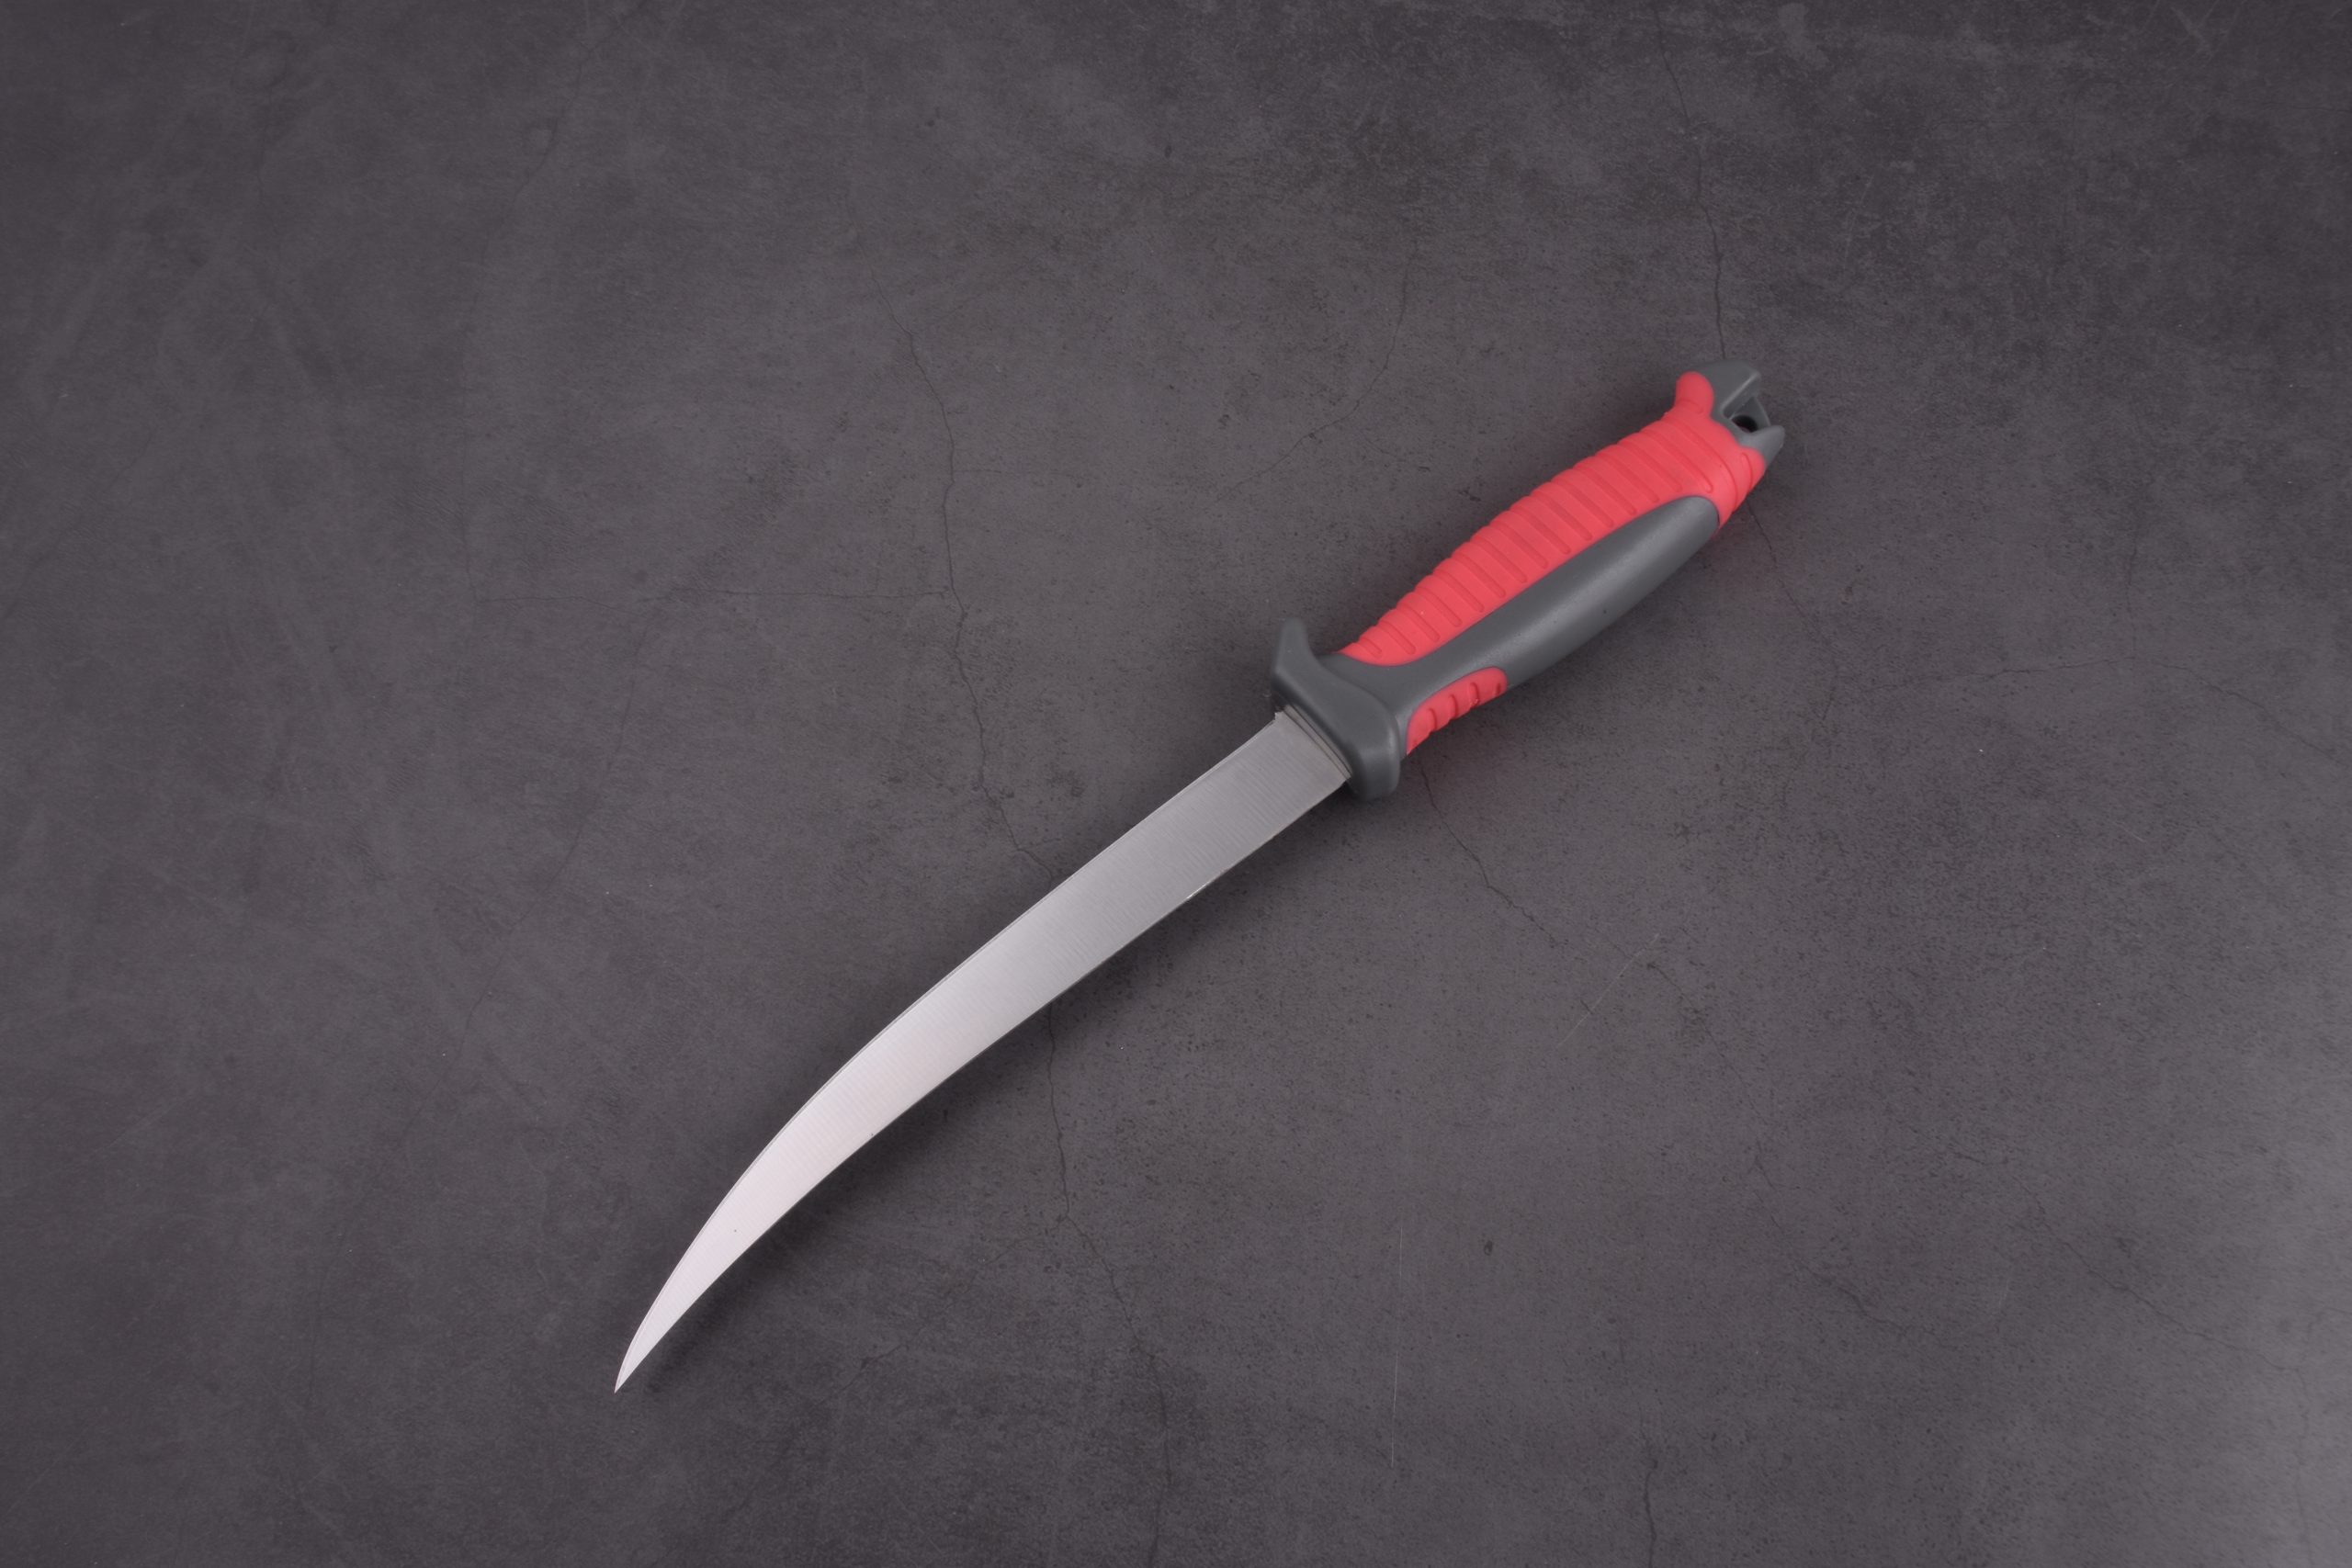 OEM Fixed Fishing Knife 3Cr13 Blade PP+TPR Handle with PP sheath black & red FX- 22654 06